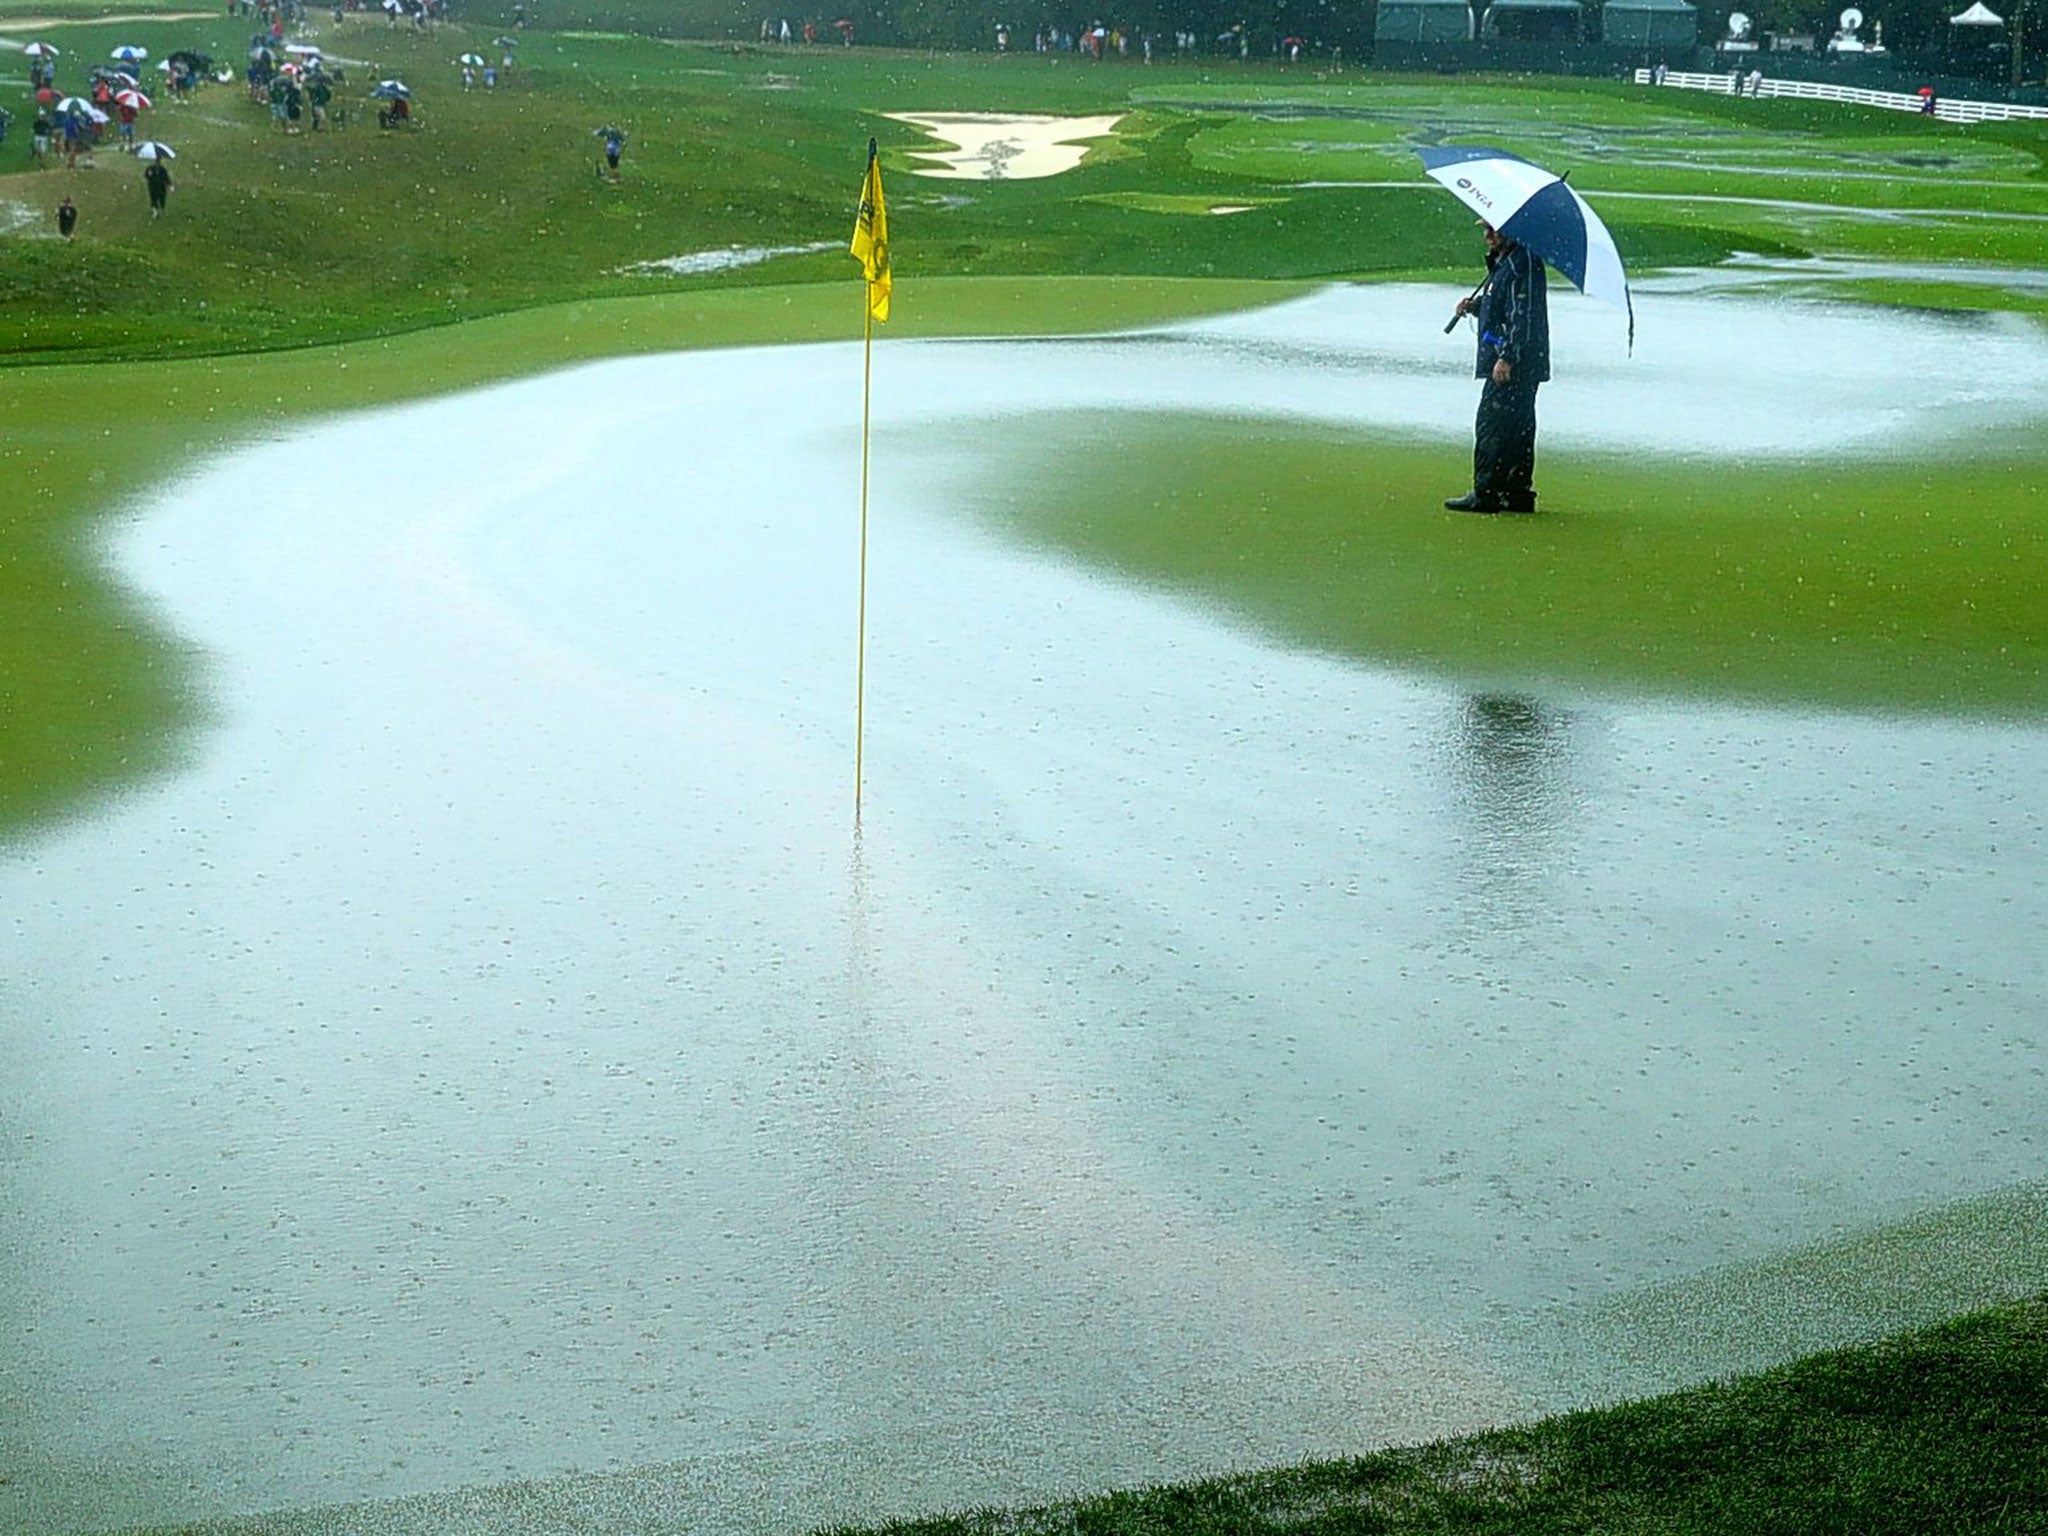 The heavily waterlogged ninth hole during today's downpour at Valhalla